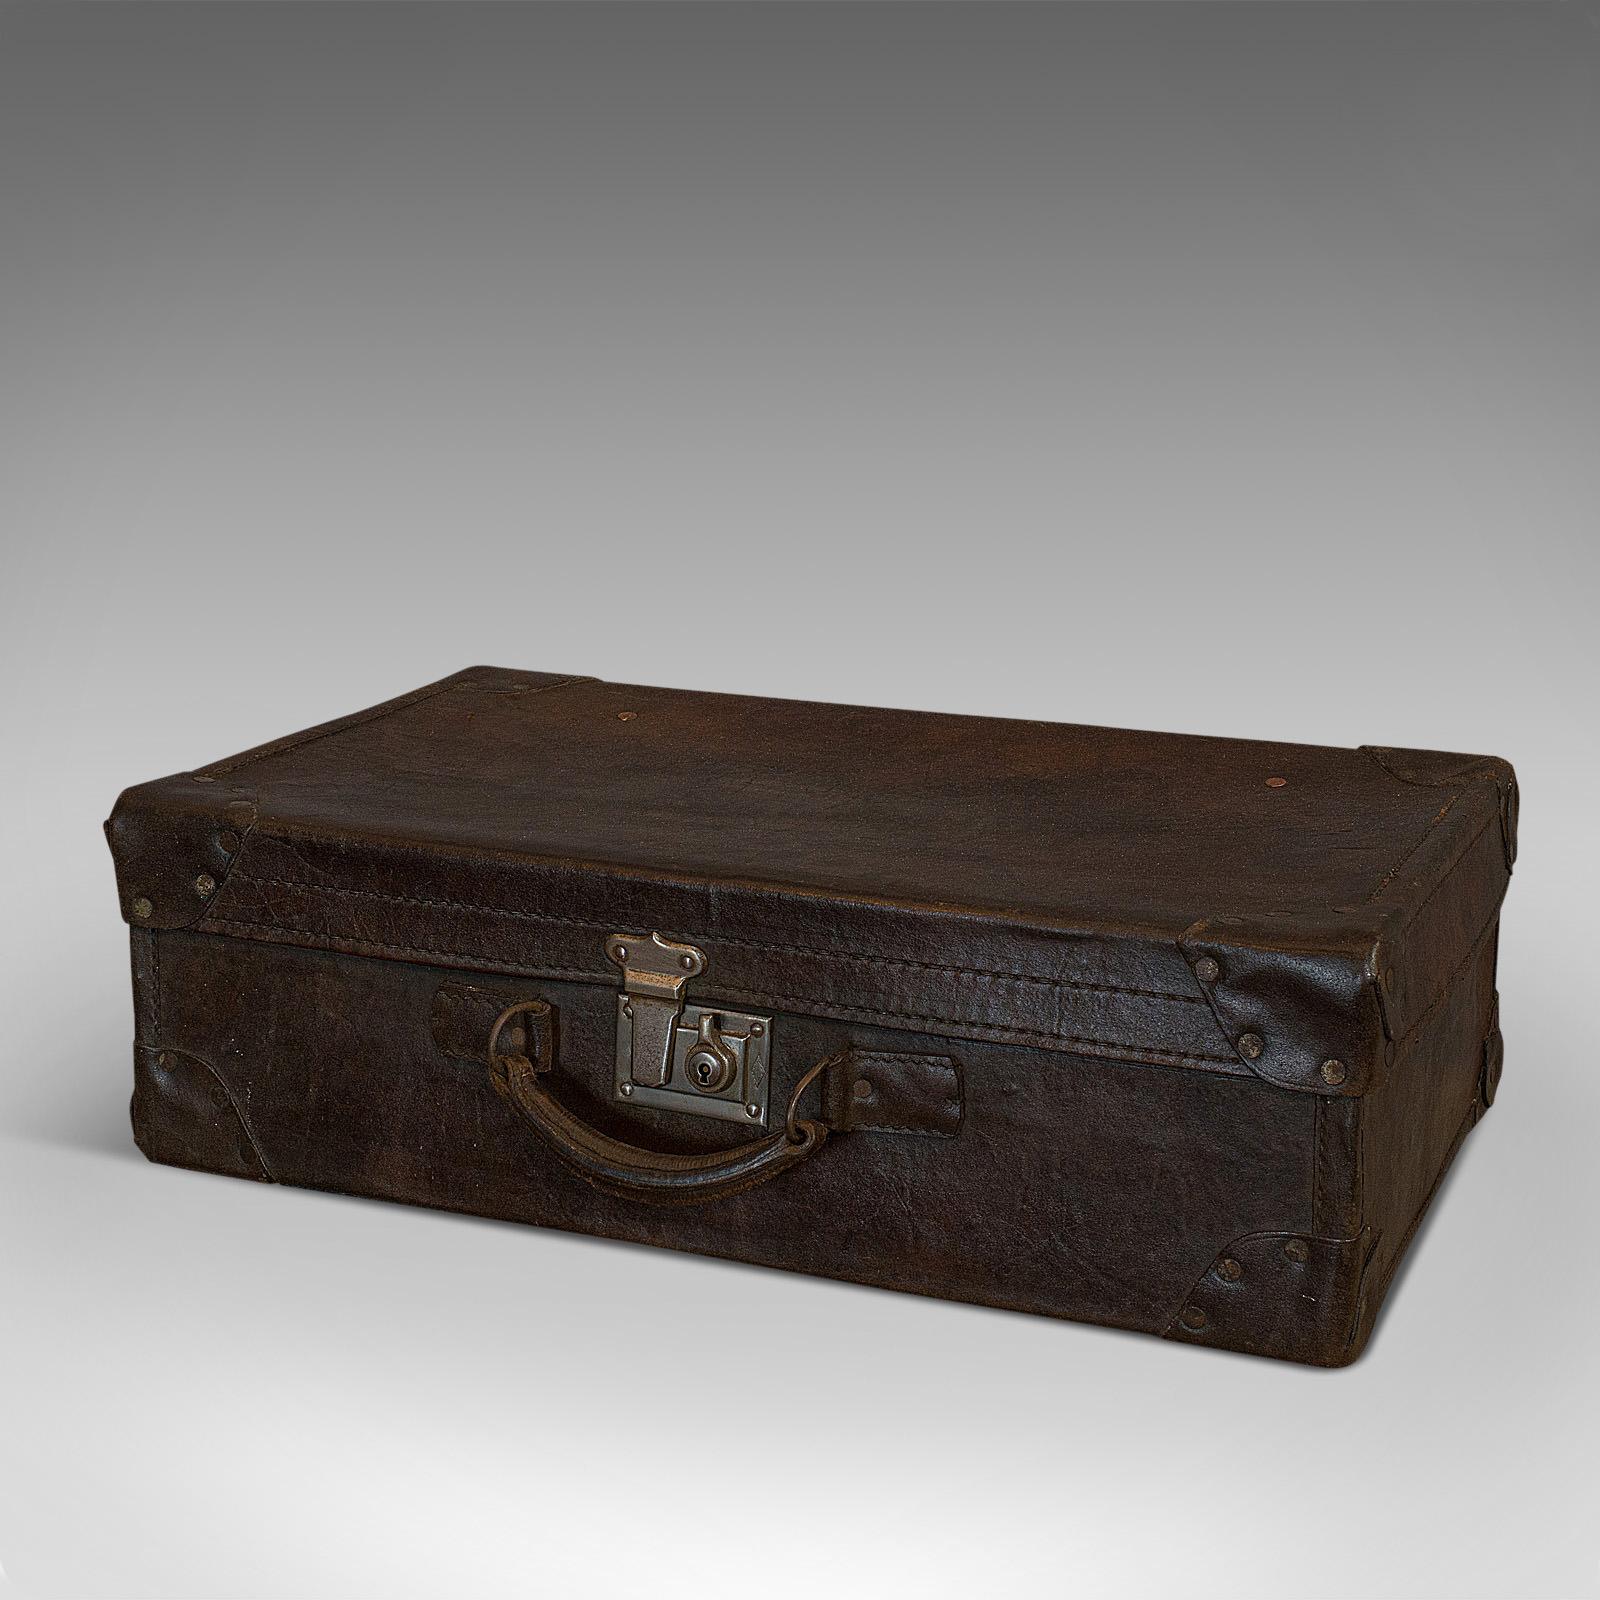 Campaign Antique Officer's Case, English, Leather, Travel, Suitcase, Luggage, circa 1920